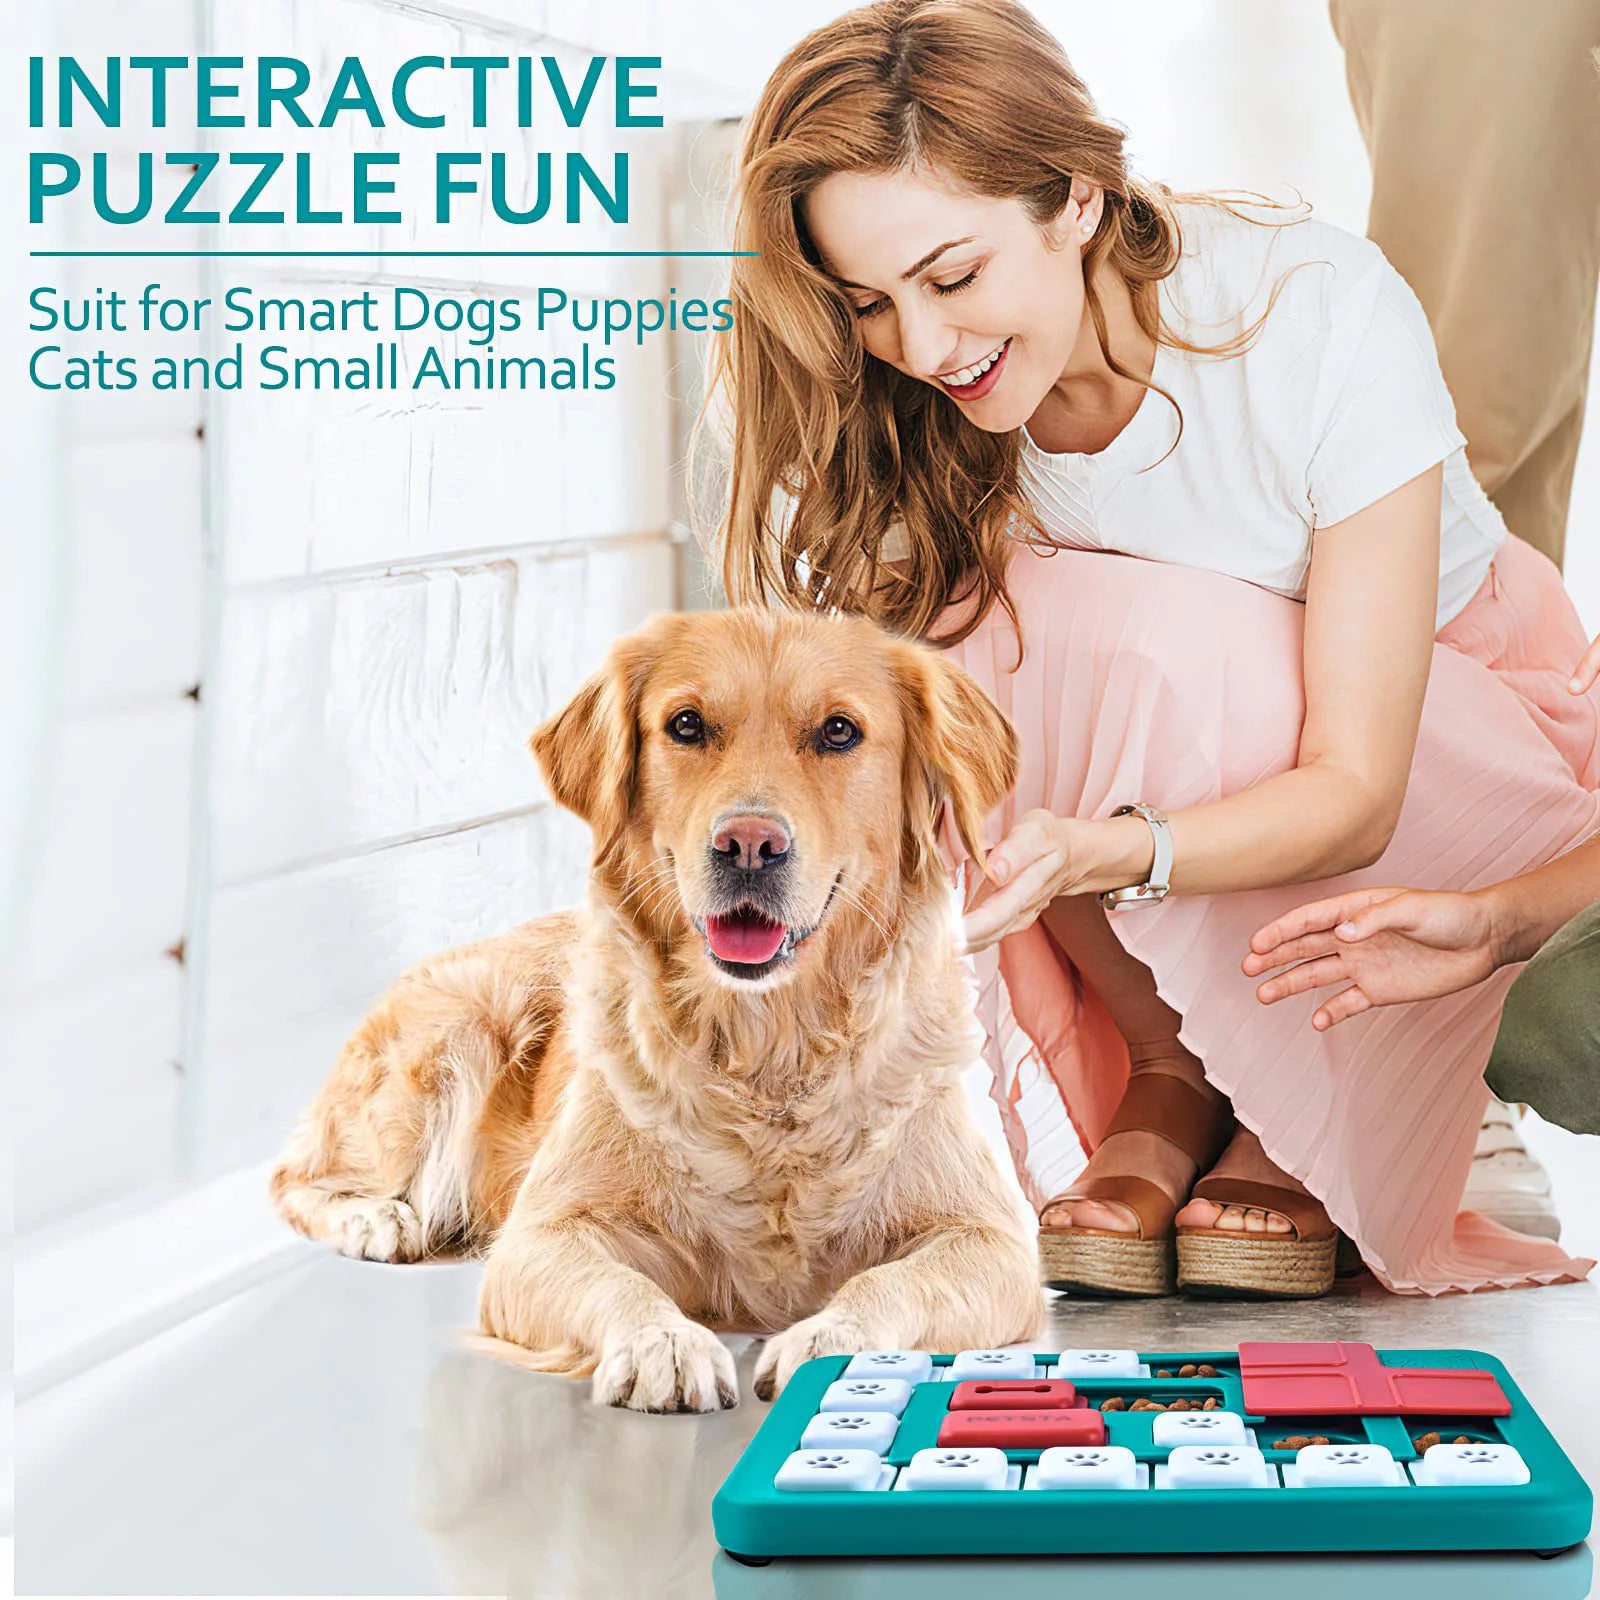 Dog Puzzle Toys for Smart Dogs, Interactive Dog Treat Puzzle for Large
 PETSTA cares about the physical and mental health of your furry friends. Making dogs and cats healthier is PETSTA's mission. PETSTA puzzle toys can help release thMental Stimulation Brain Games, Dog Food Puzzles Treat Dispensing Toys